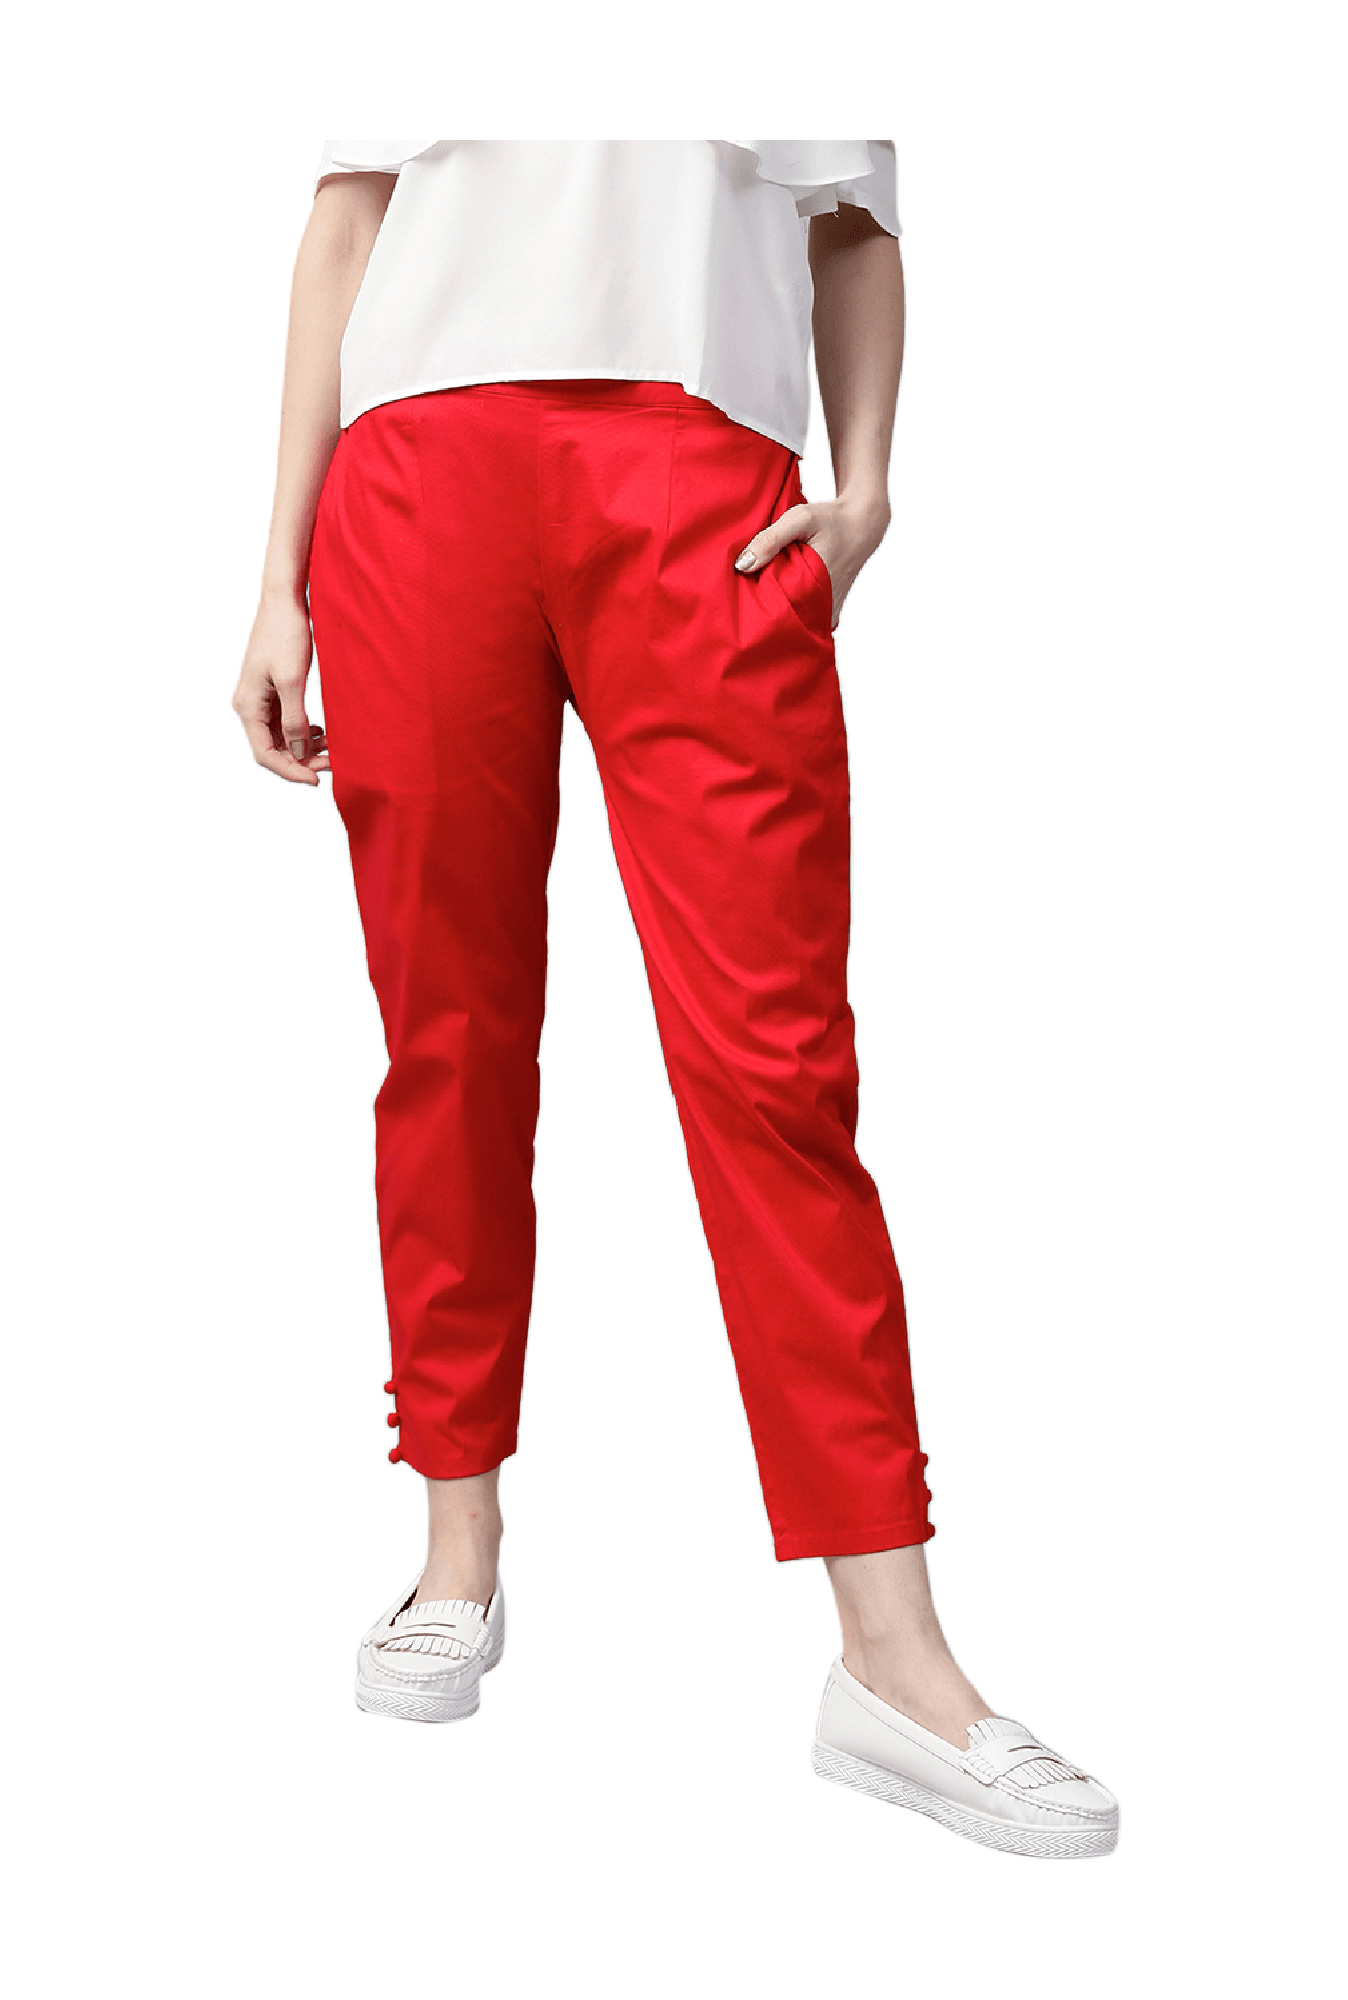 TRENDY Trousers FOR MAN WITH LATEST BUTTORN PANT trouser Men Lower pants  Jogger Perfect Fit 